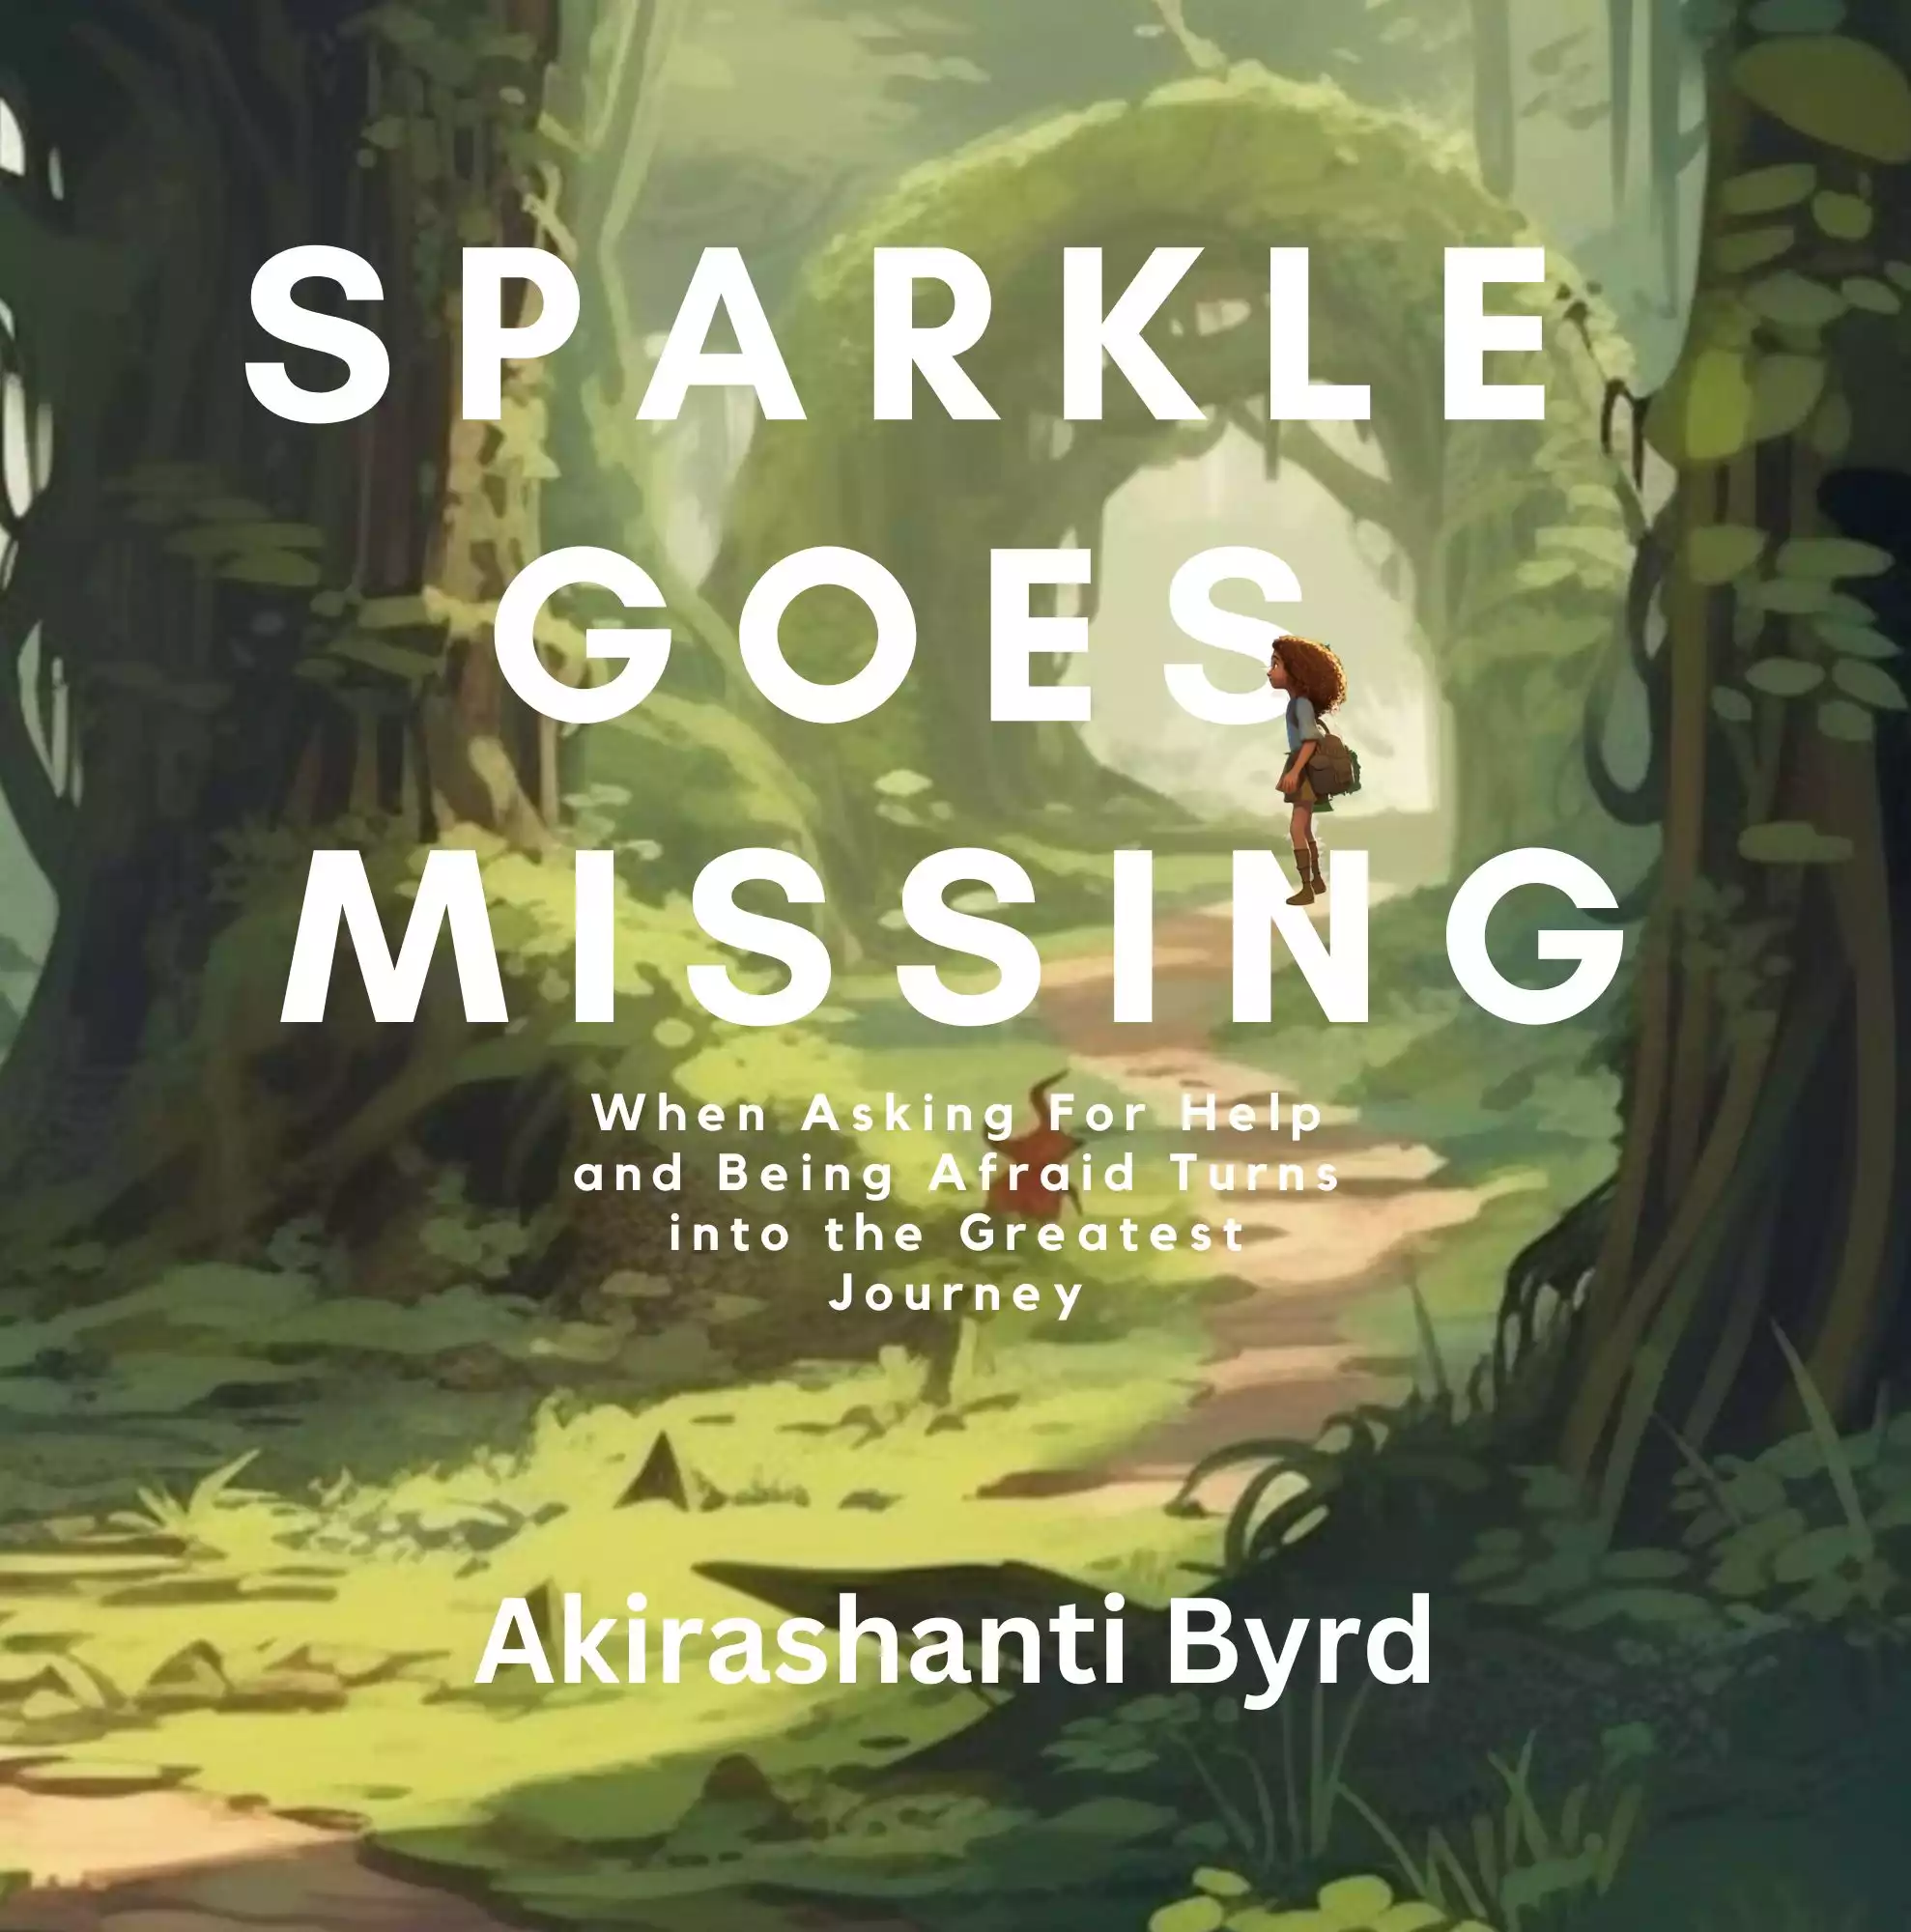 Sparkle goes missing: when asking for help and being afraid turns into the greatest journey